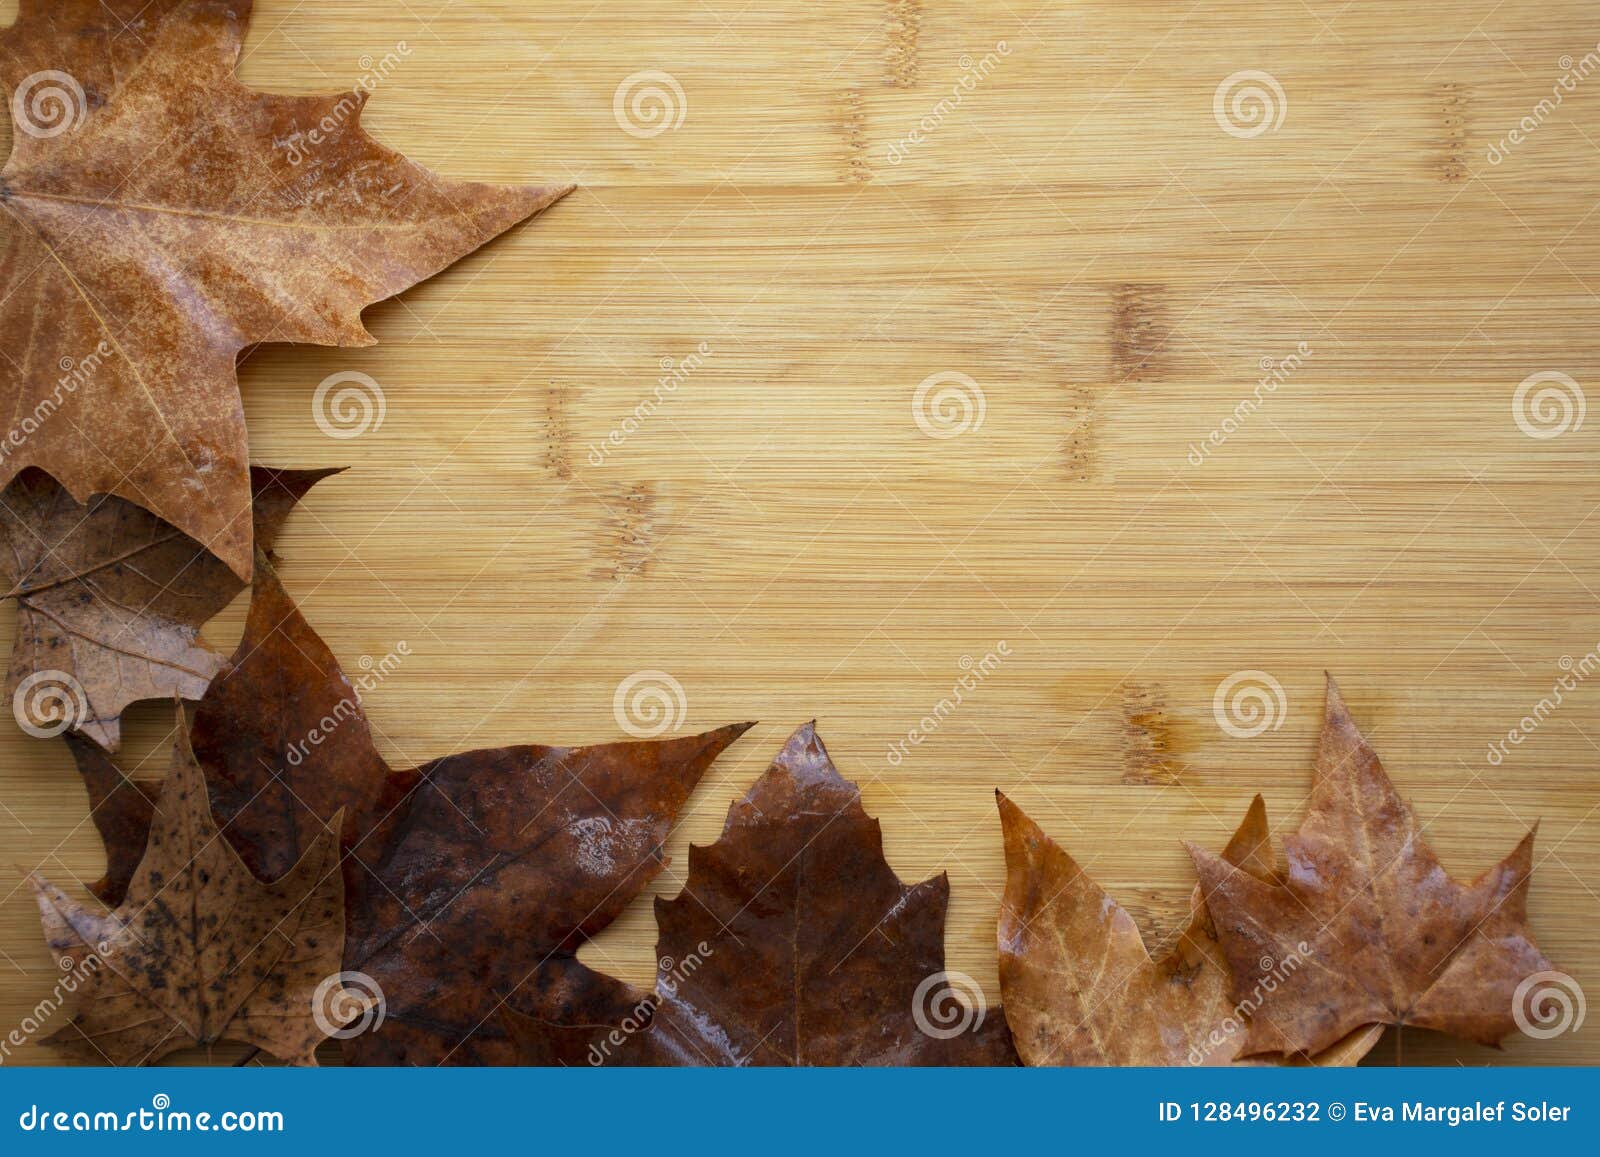 Autumn Dry Leaves Background Stock Photo - Image of dried, white: 128496232